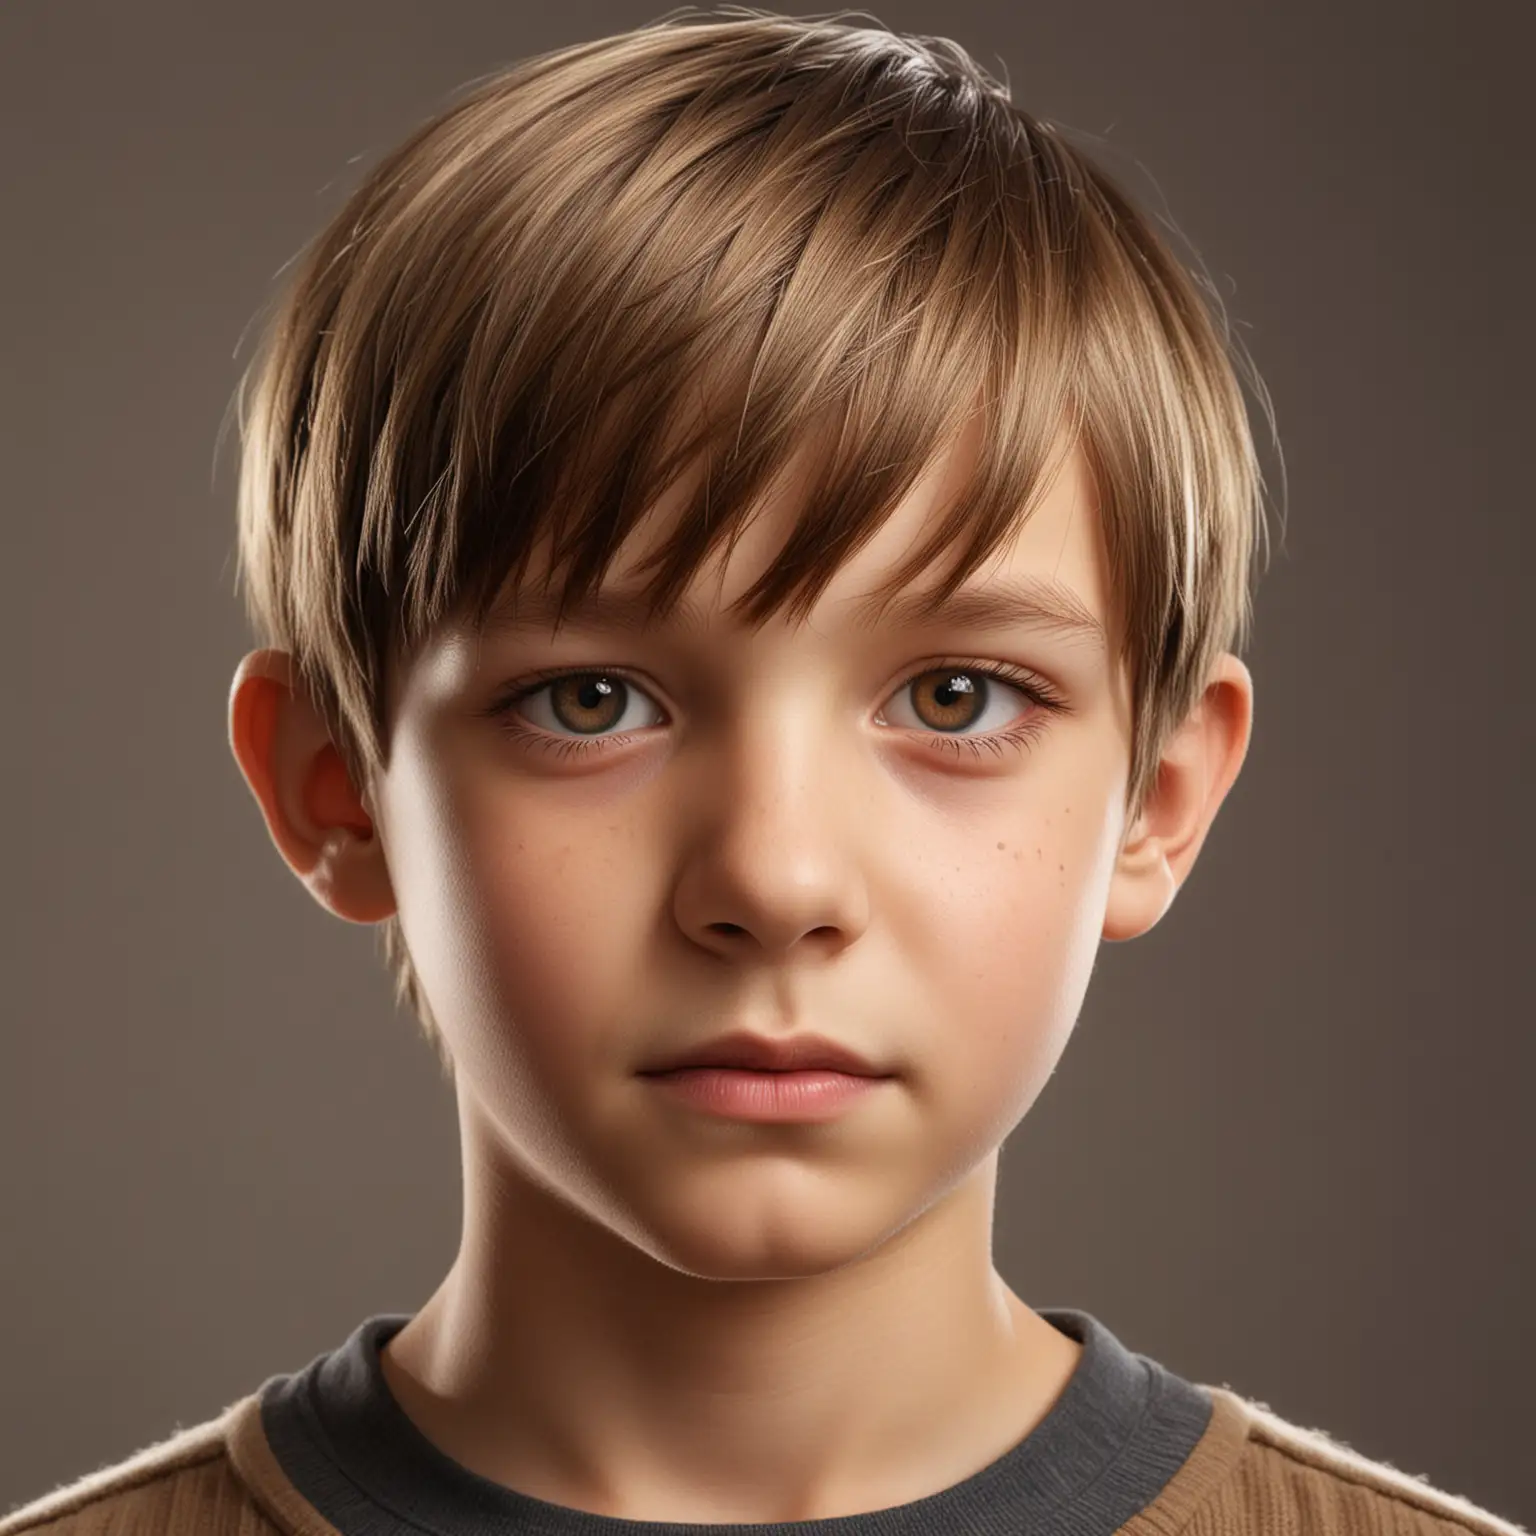 CloseUp Portrait of Eleven Year Old Boy with Neatly Combed Light Brown Hair in Bright Light